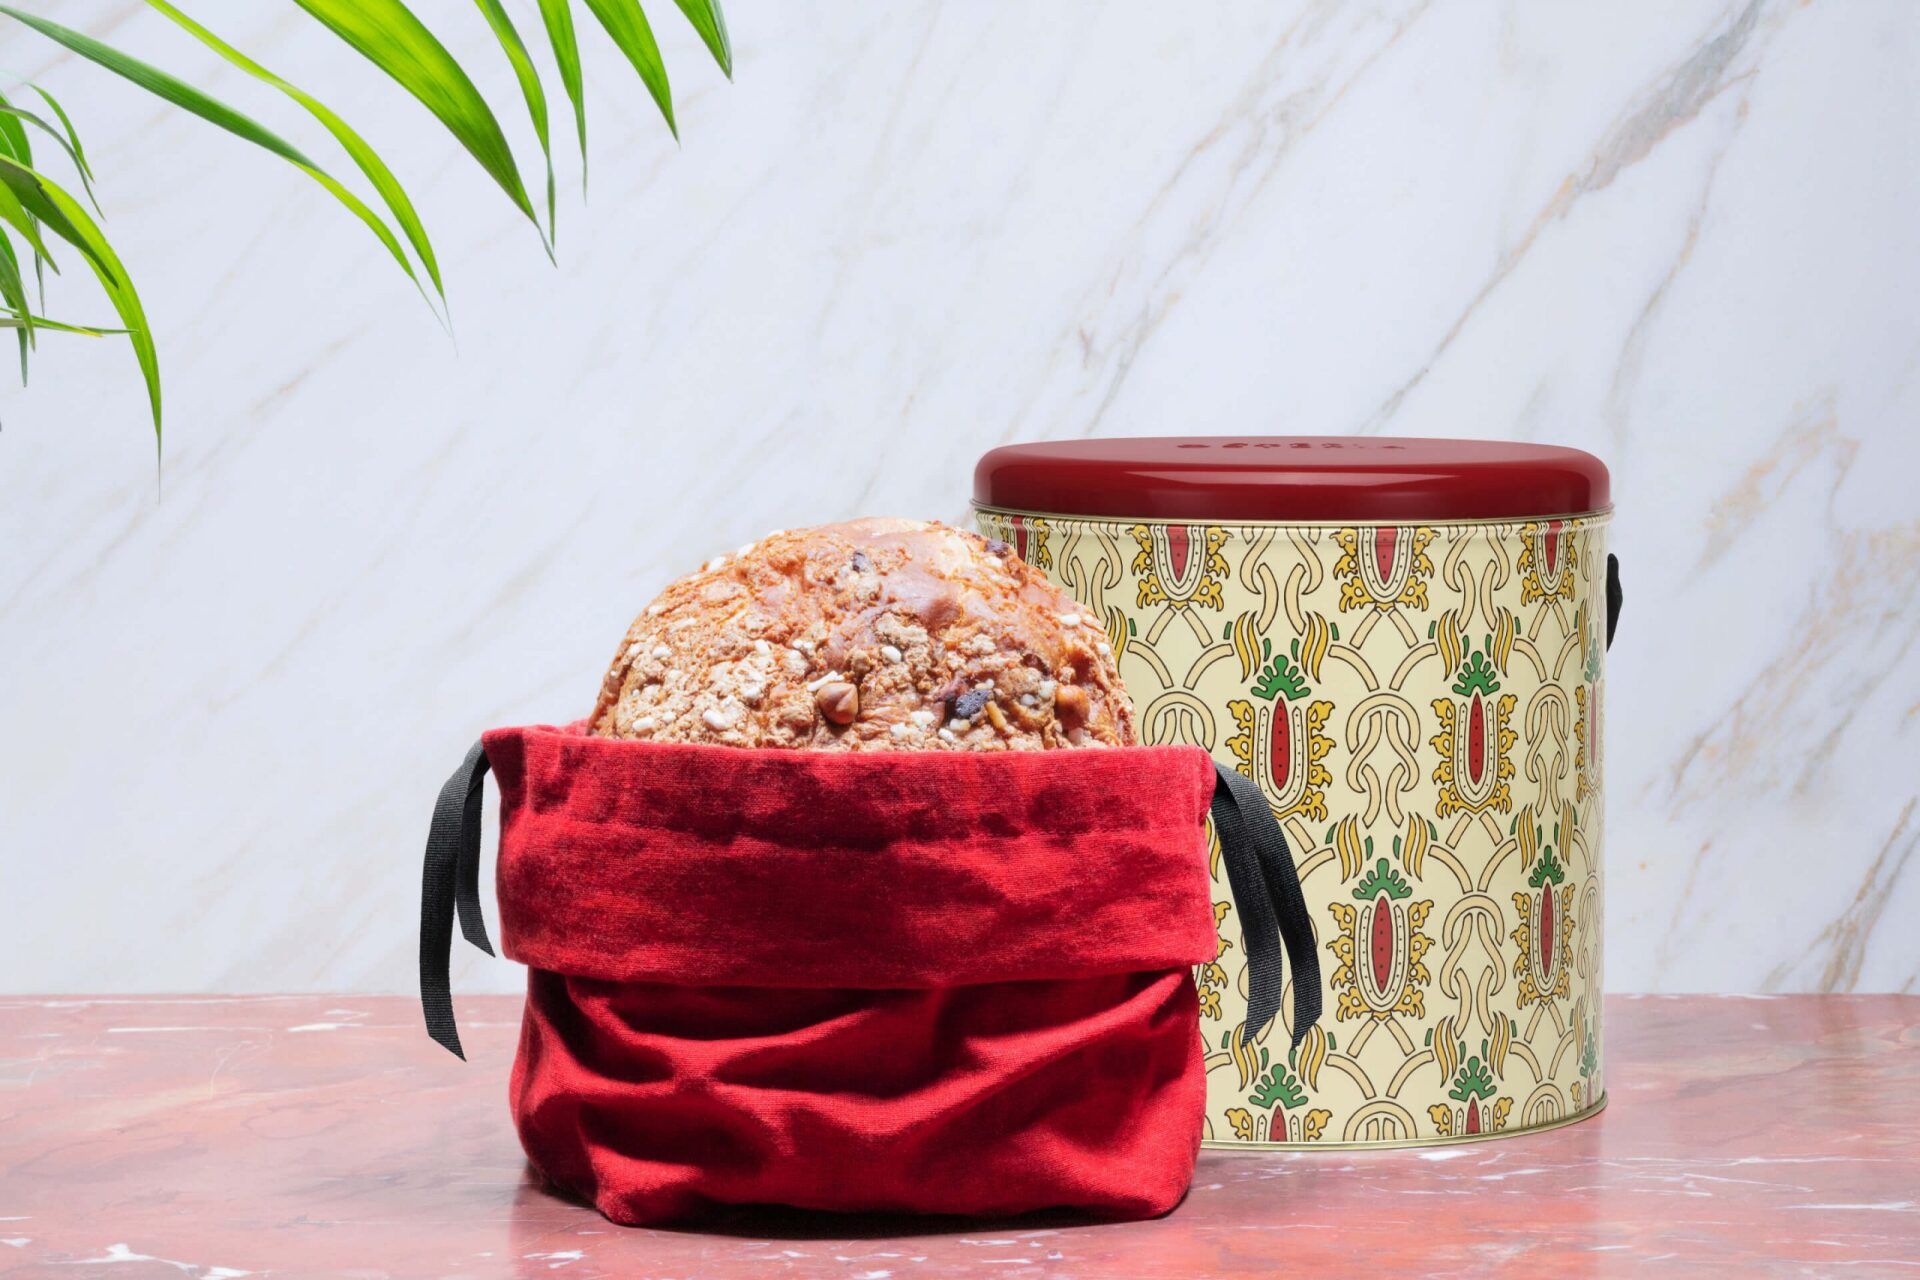 Most Expensive Panettone Commercially Available: Beverly Hills Chefs set world record